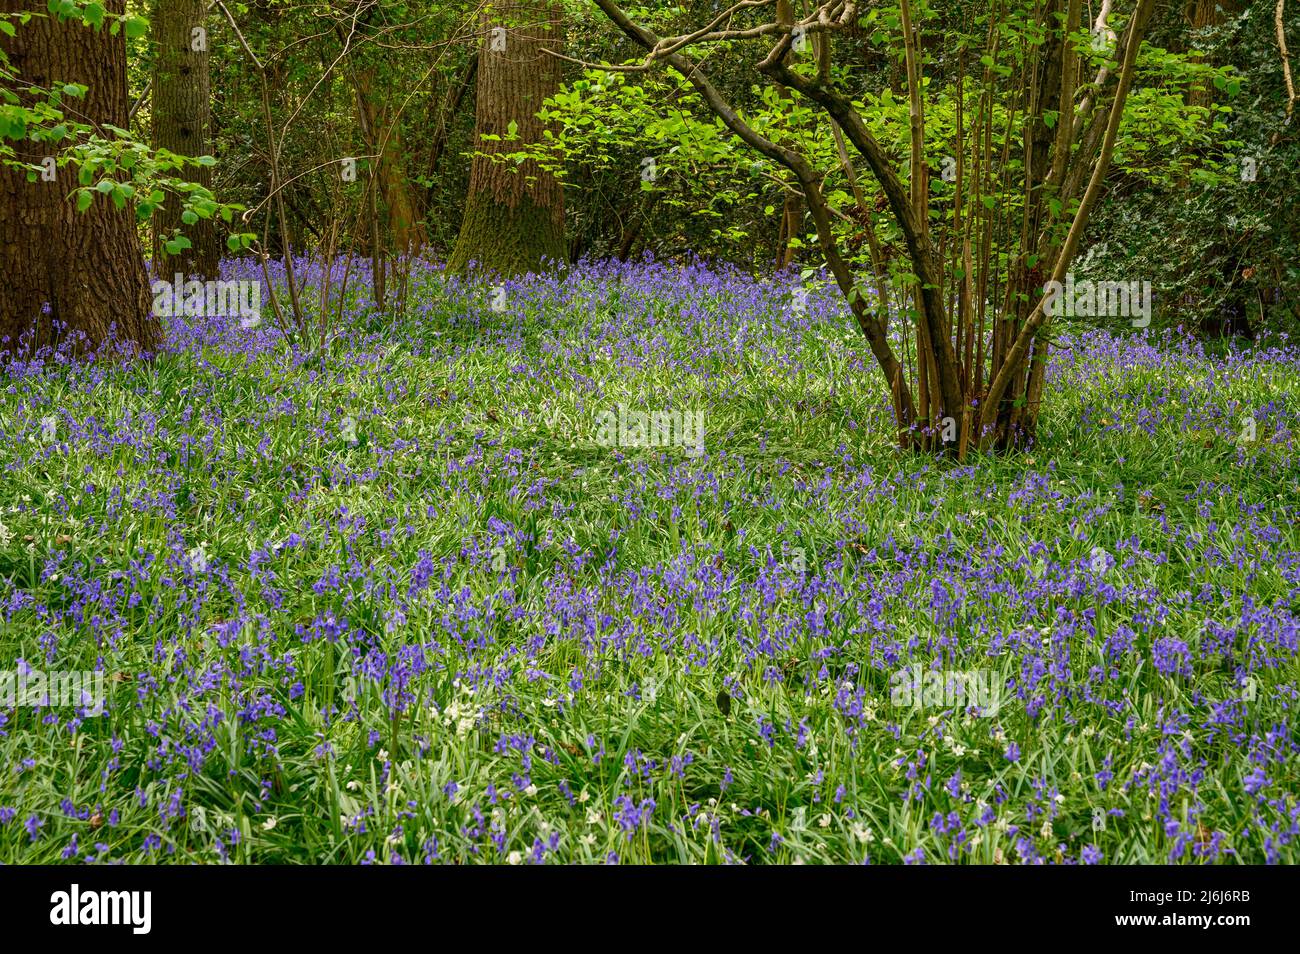 The forest floor is covered in bluebells in a wood on the outskirts of Billingshurst in West Sussex, England. Stock Photo